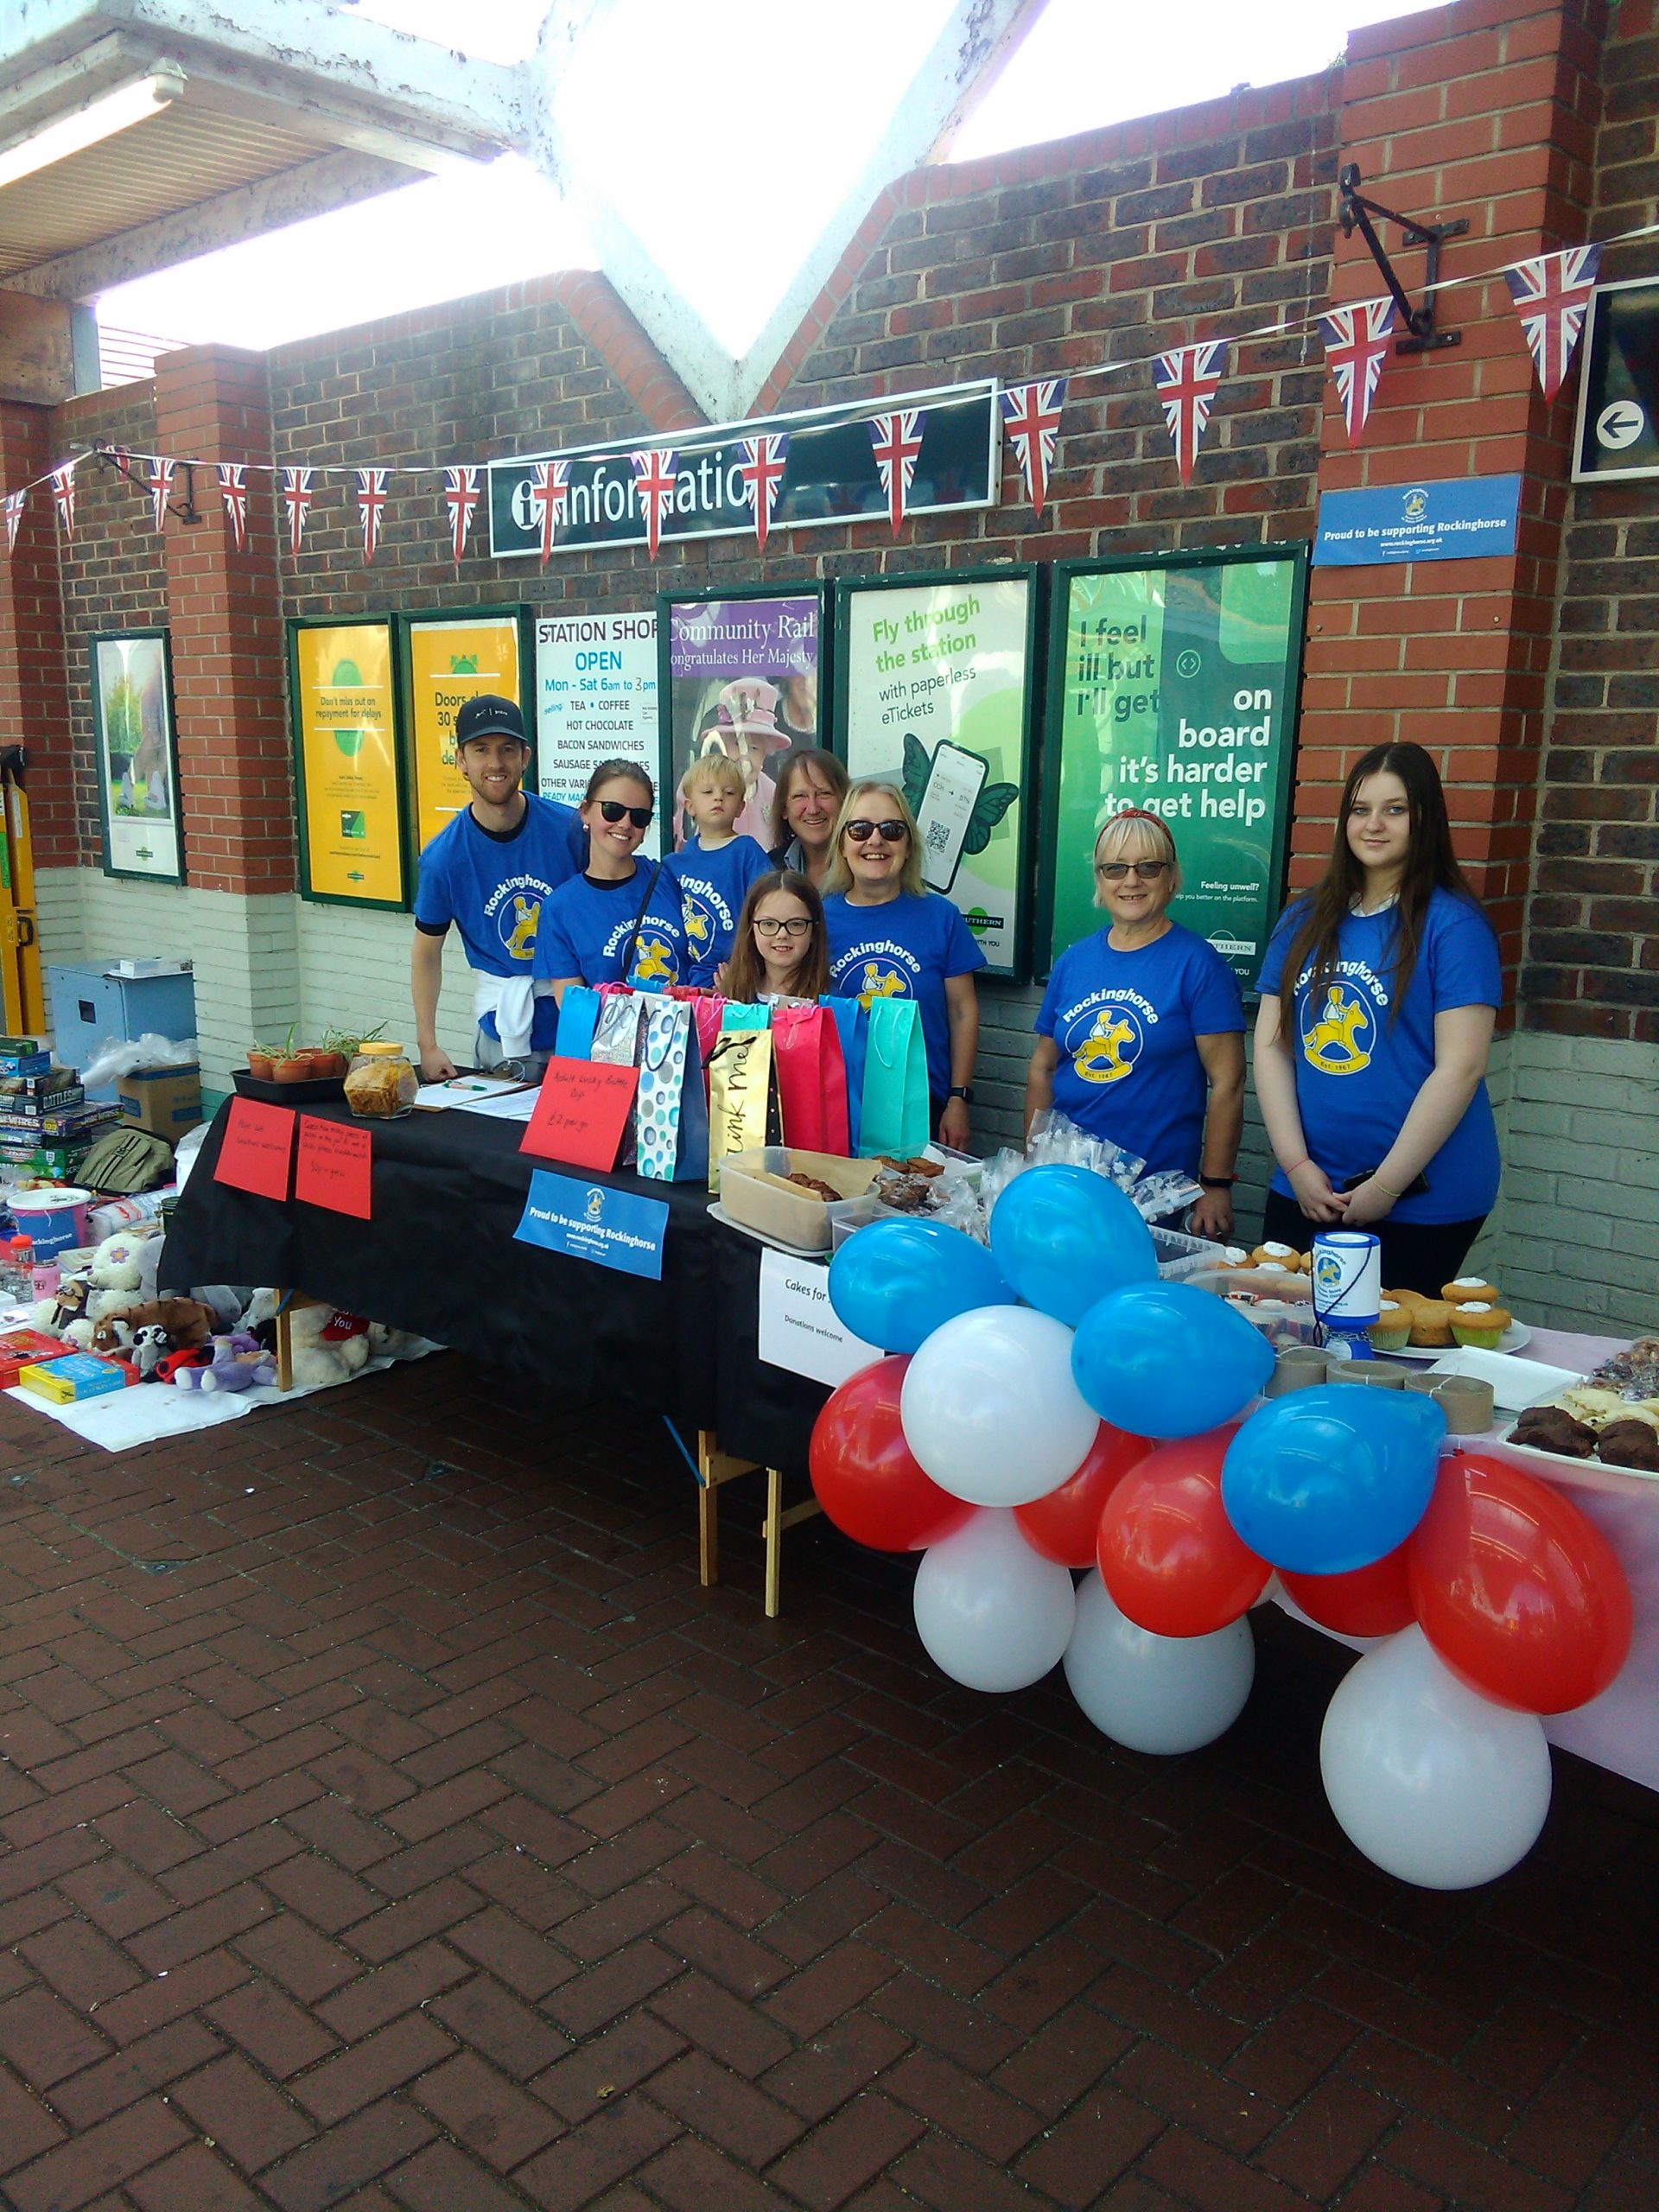 Littlehampton station staff make good use of their space – and support a good cause!